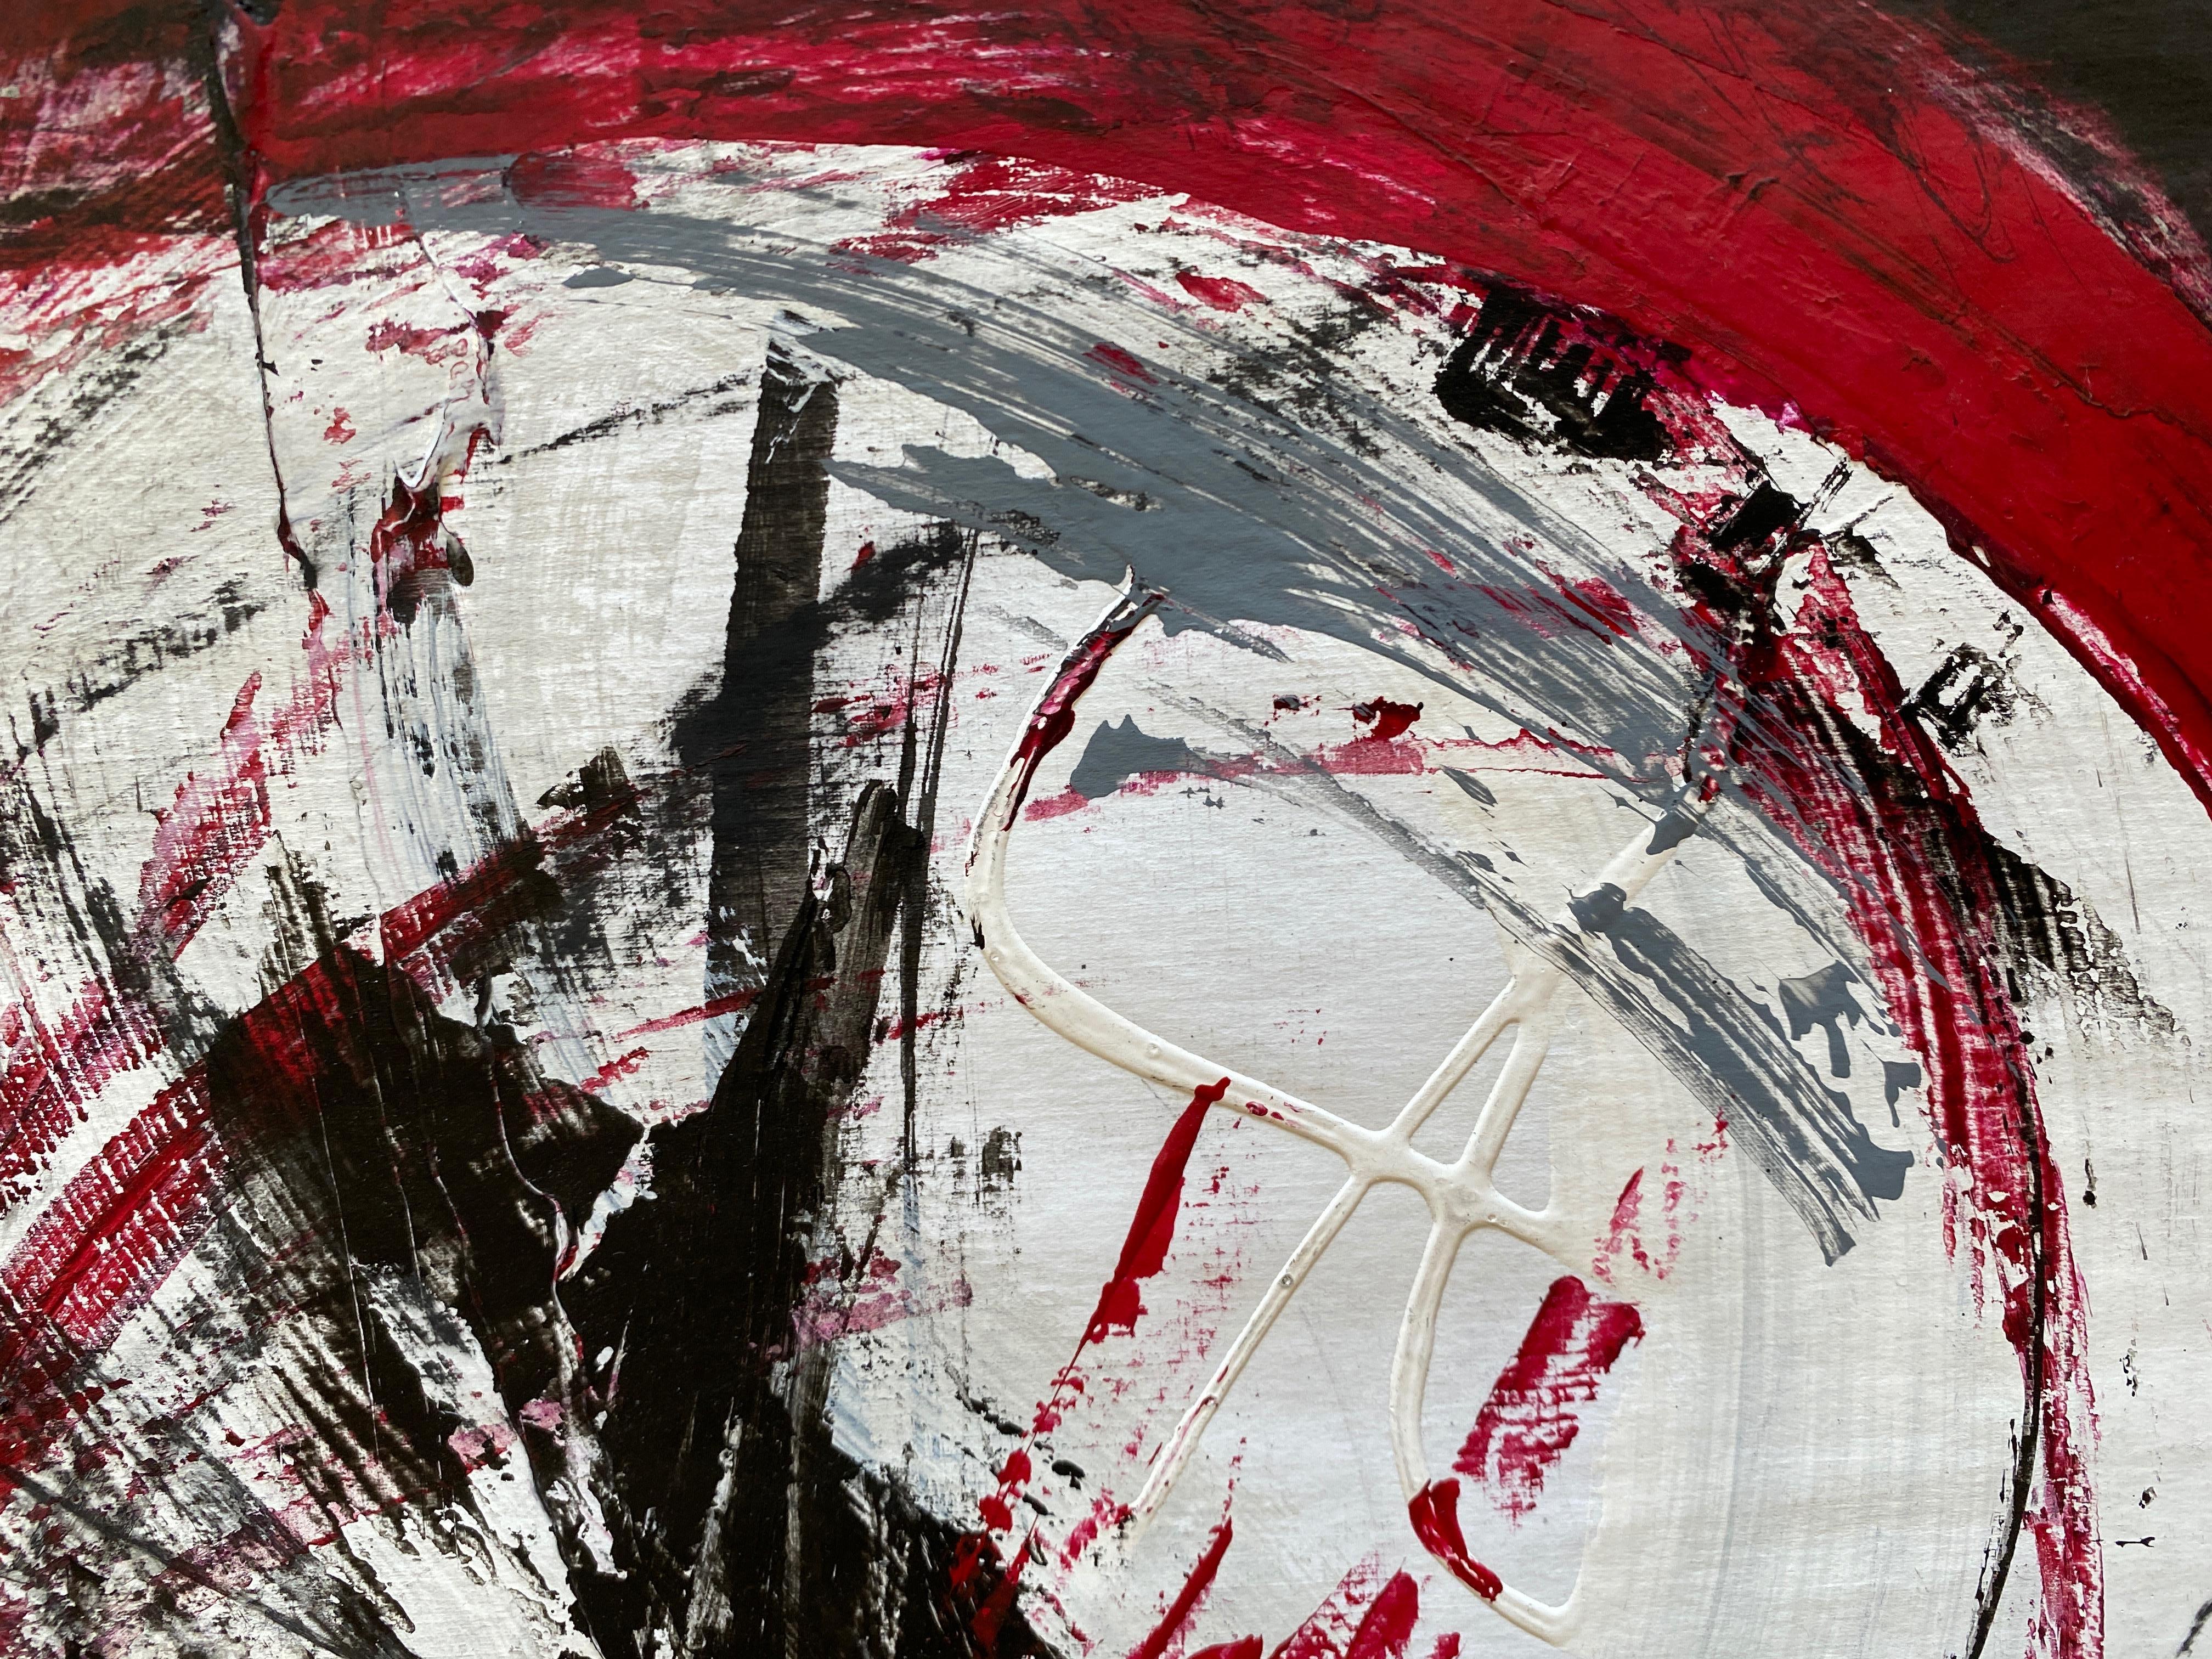 This acrylic and ink painting on paper by Marko Kratohvil is a explosion of red, black white and grey colors painted with energetic gestural movements.  Large concentric circles form at the base of the painting with spears of color intersecting in a